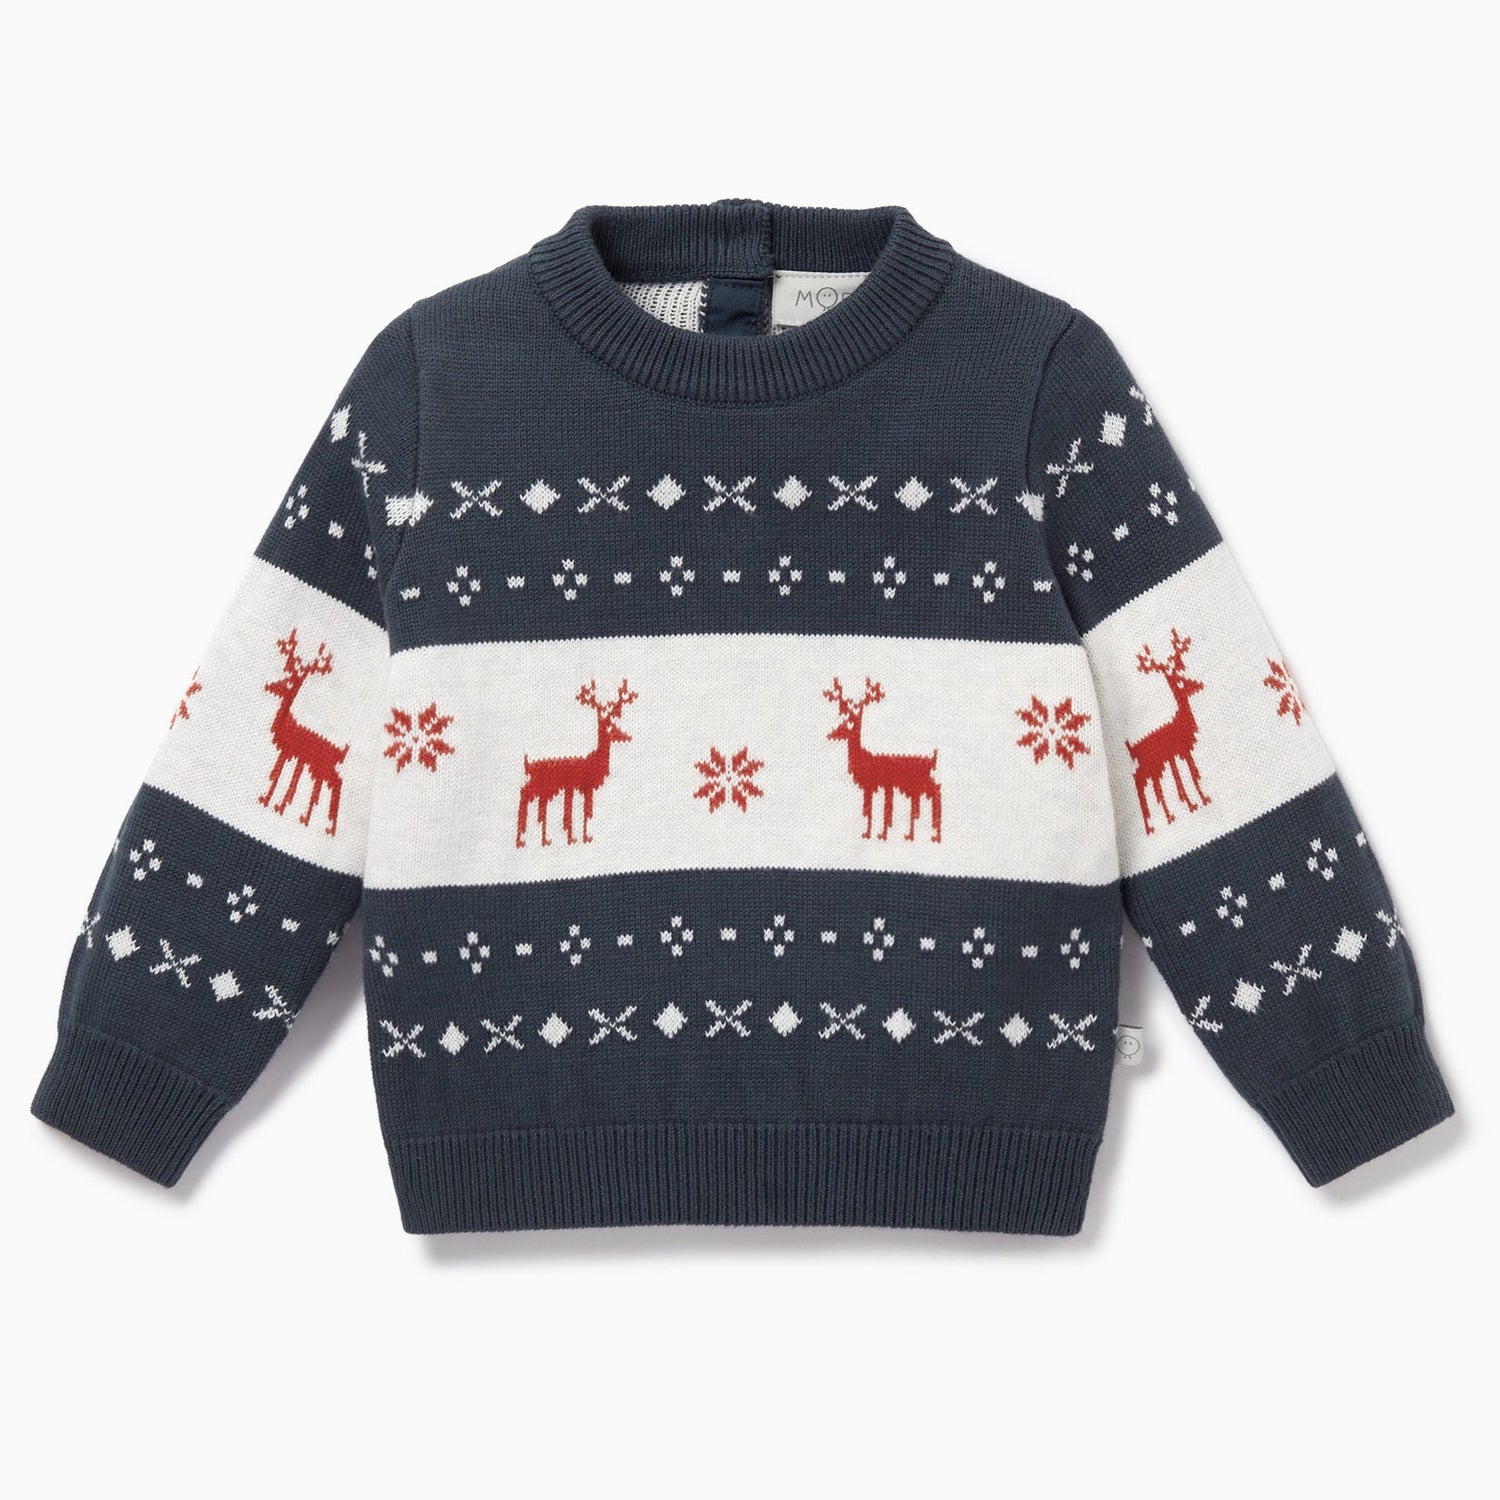 Knitted baby reindeer jumper front